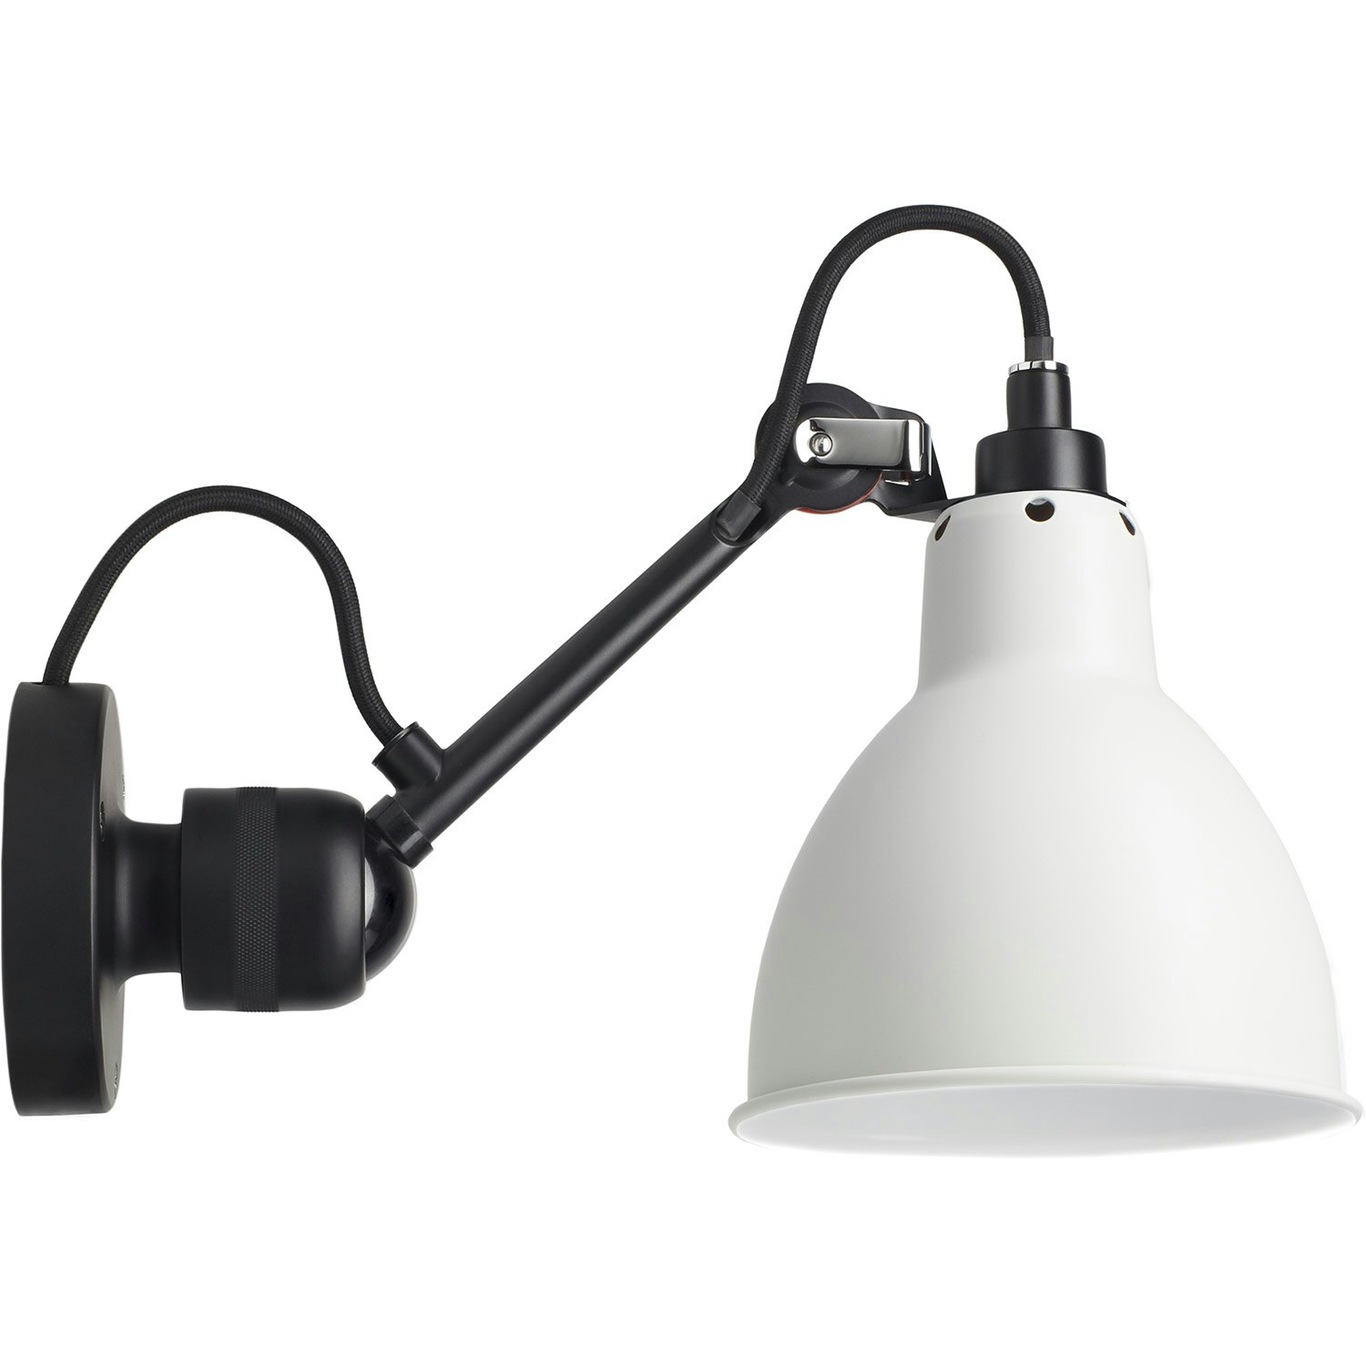 Lampe Gras N°304 Wall Lamp With Cord, Black / White